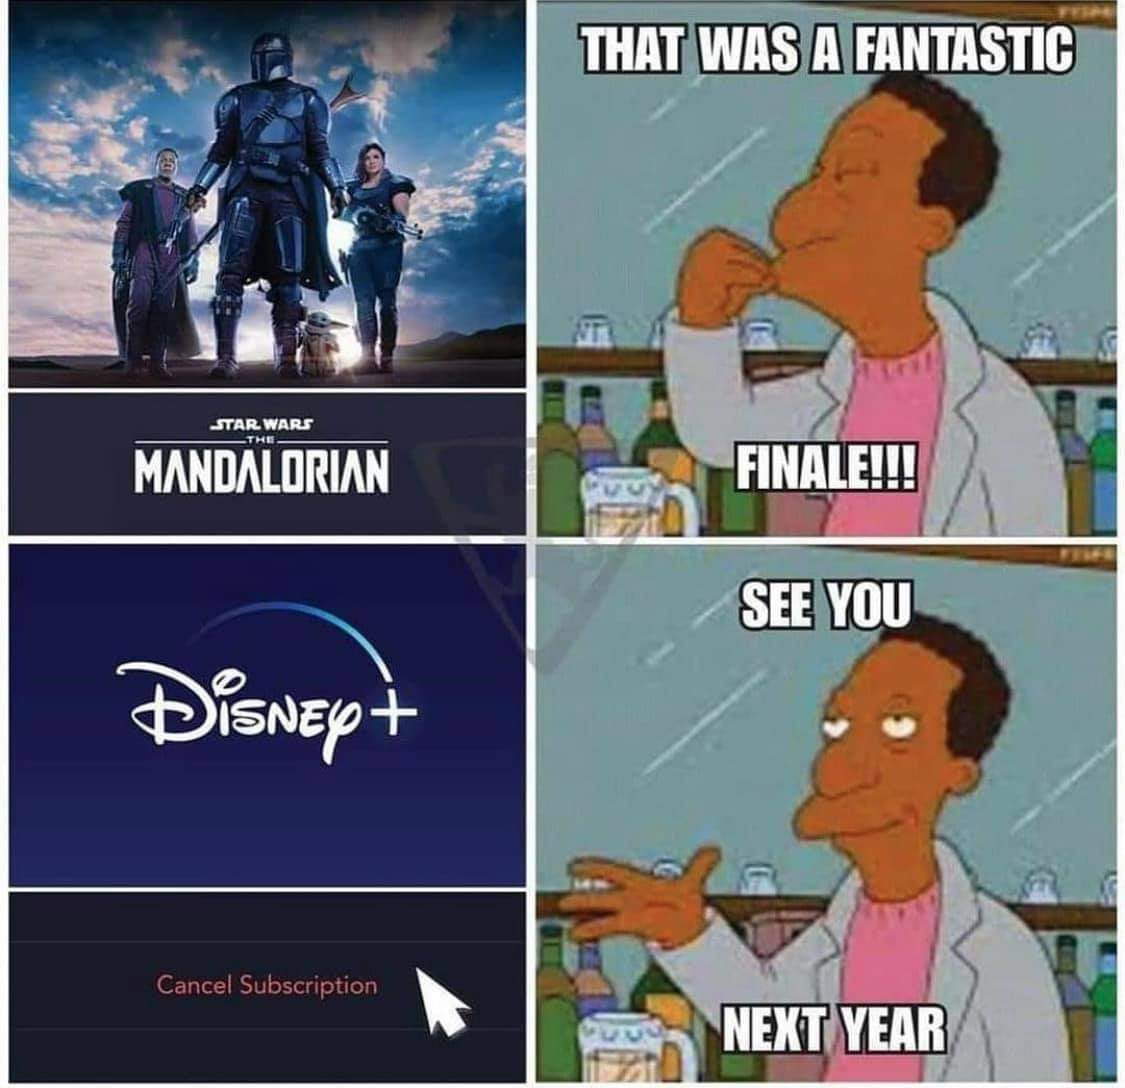 disney channel - That Was A Fantastic Star Wars Mandalorian Finale!!! See You Disneyt Cancel Subscription Next Year